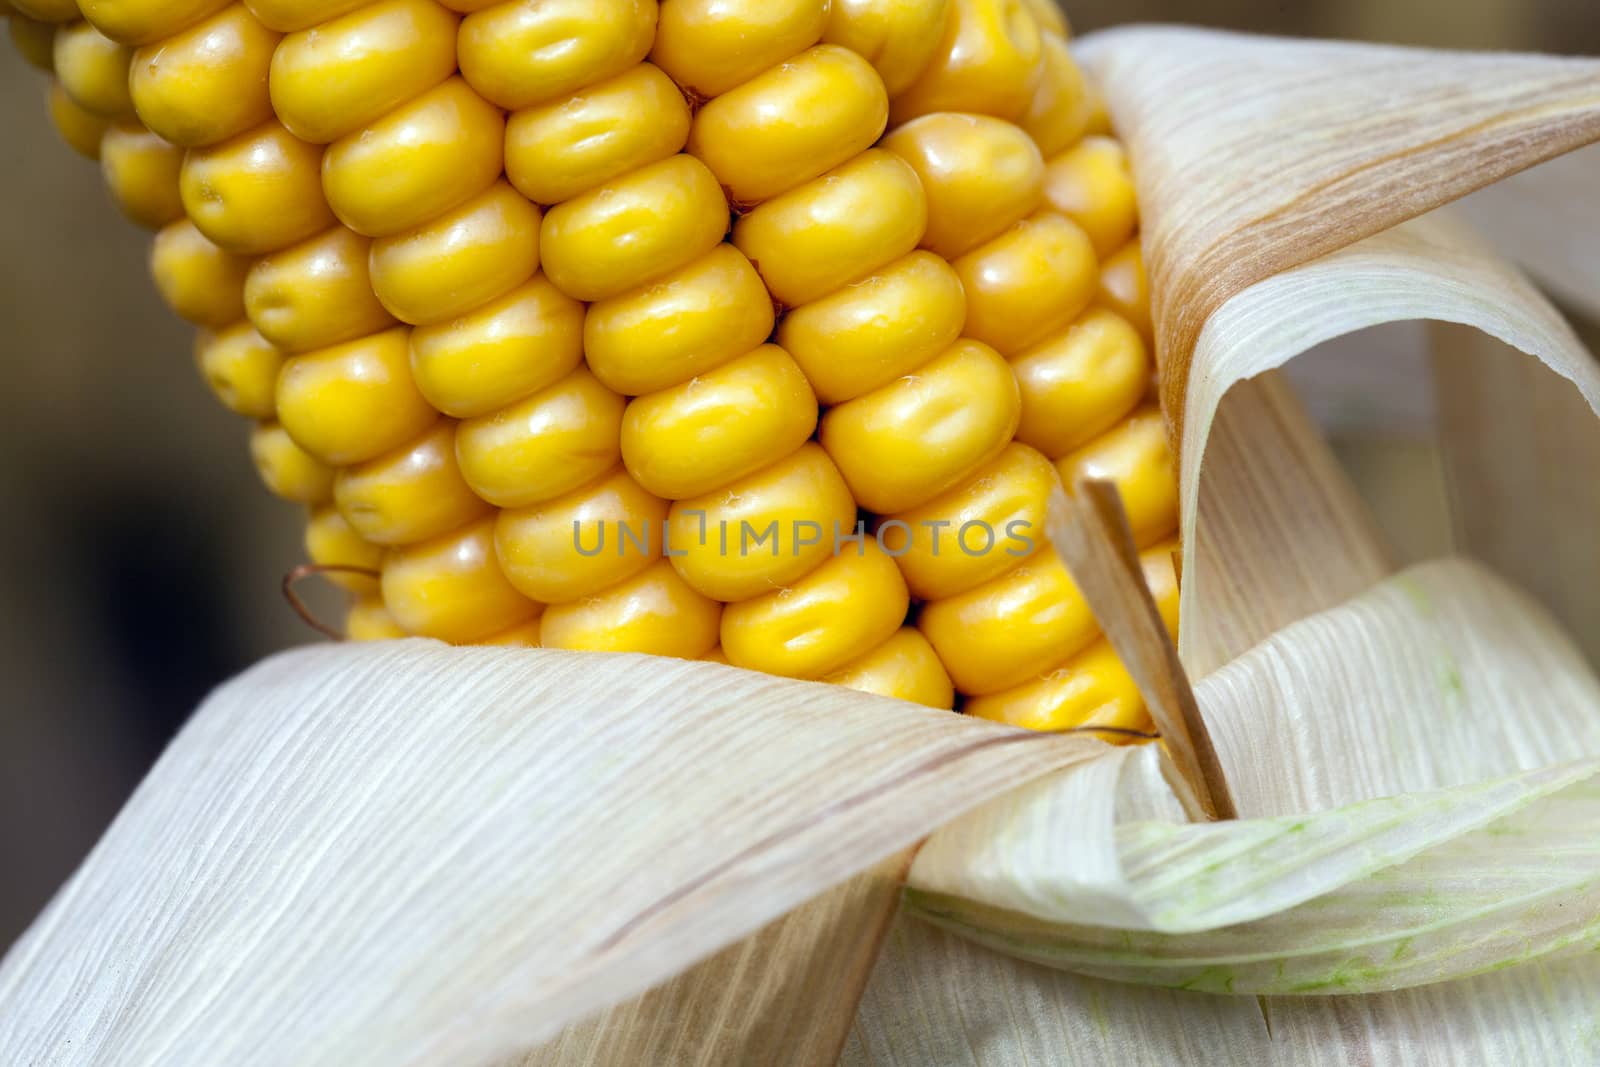 Agricultural field on which photographed mature yellowed corn, close up, natural foods